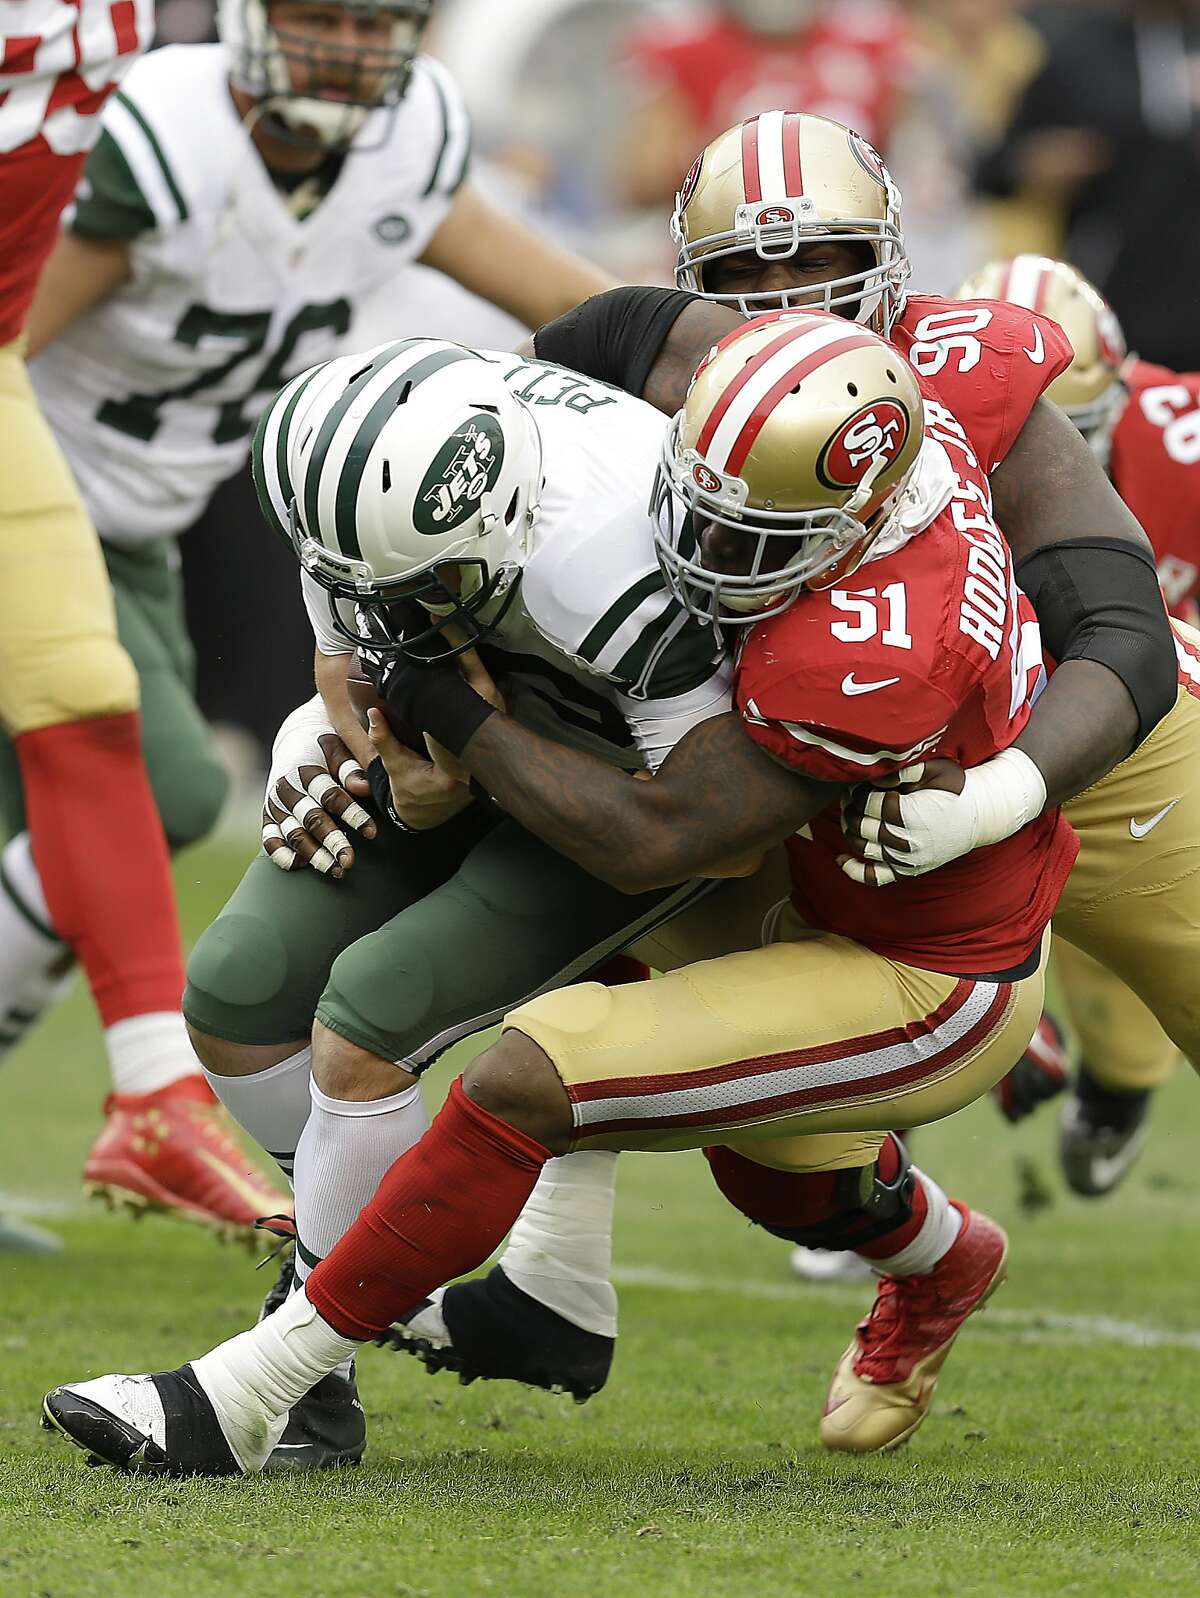 New York Jets quarterback Bryce Petty (9) is sacked by San Francisco 49ers middle linebacker Gerald Hodges (51) and linebacker Ahmad Brooks, not pictured, as nose tackle Glenn Dorsey (90) follows the play during the first half of an NFL football game in Santa Clara, Calif., Sunday, Dec. 11, 2016. (AP Photo/Ben Margot)